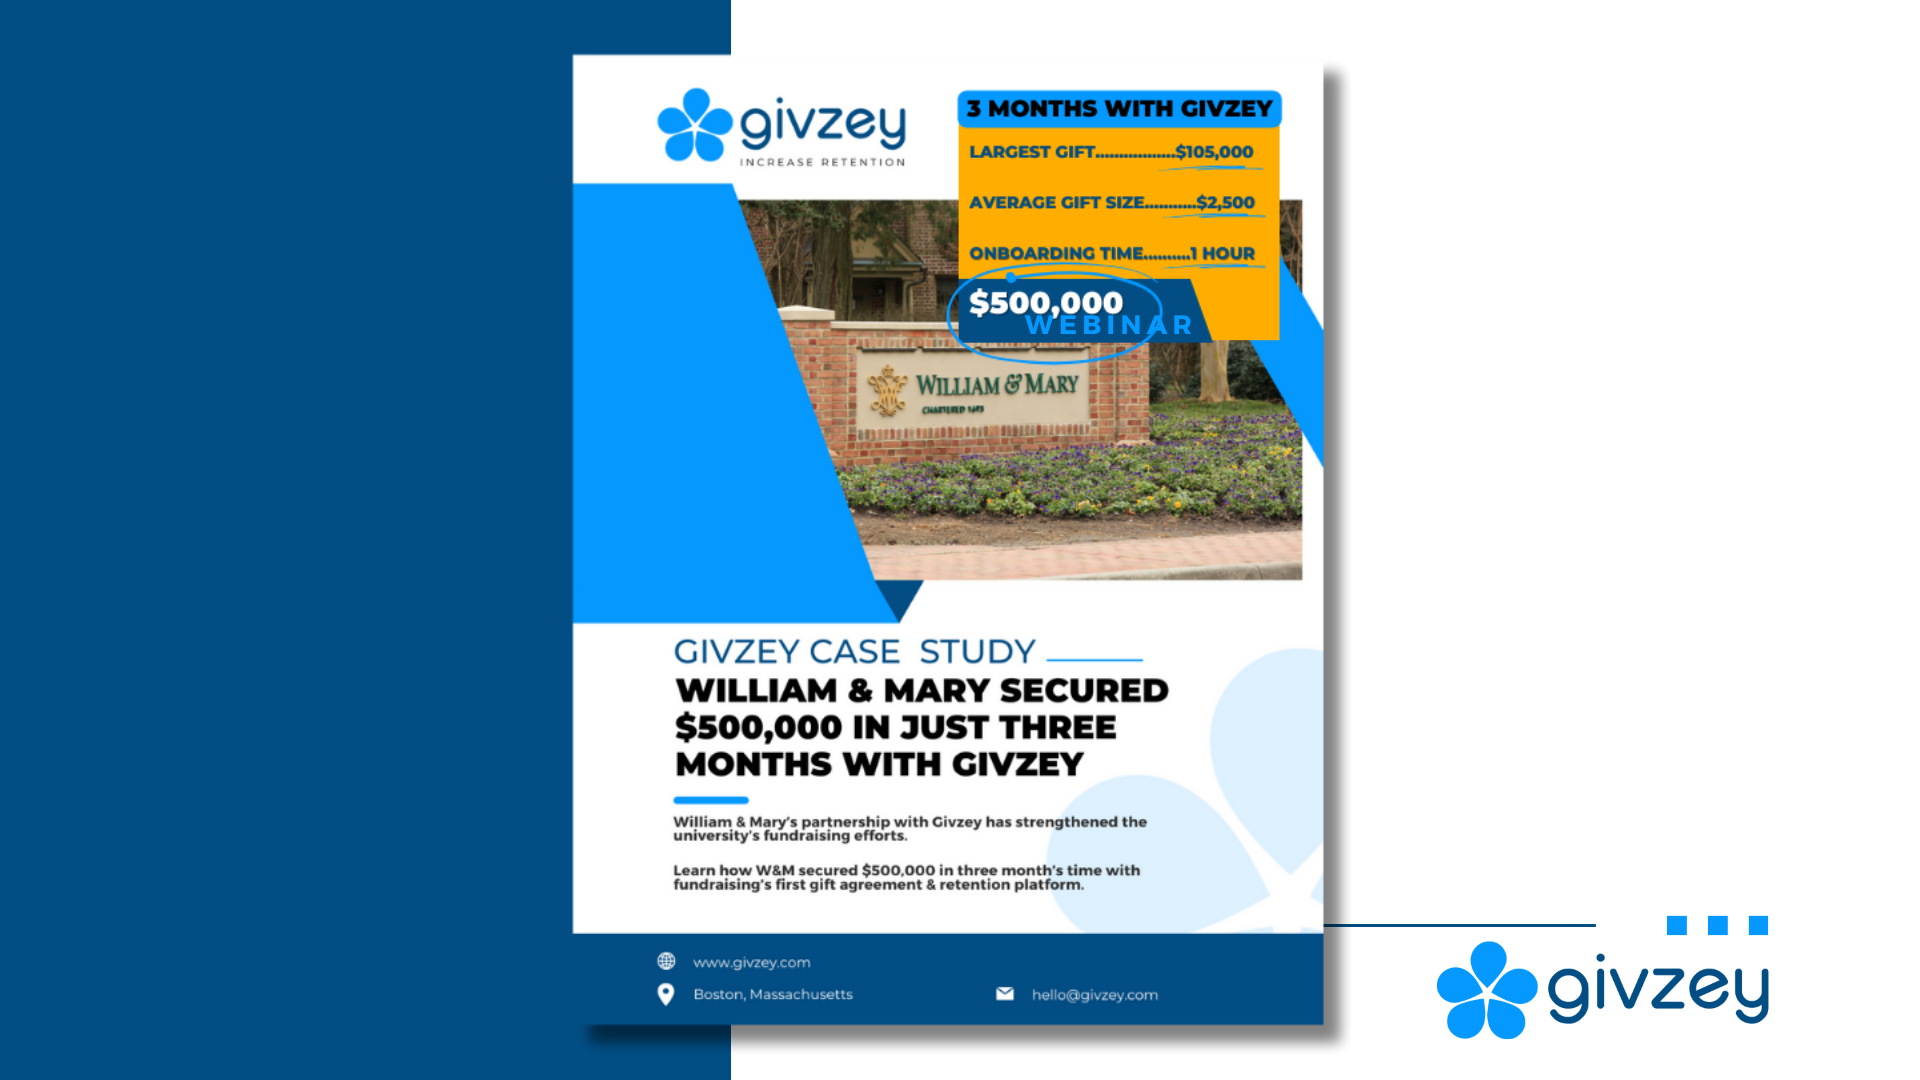 William & Mary Secure $500,000 with Givzey in 3 Months